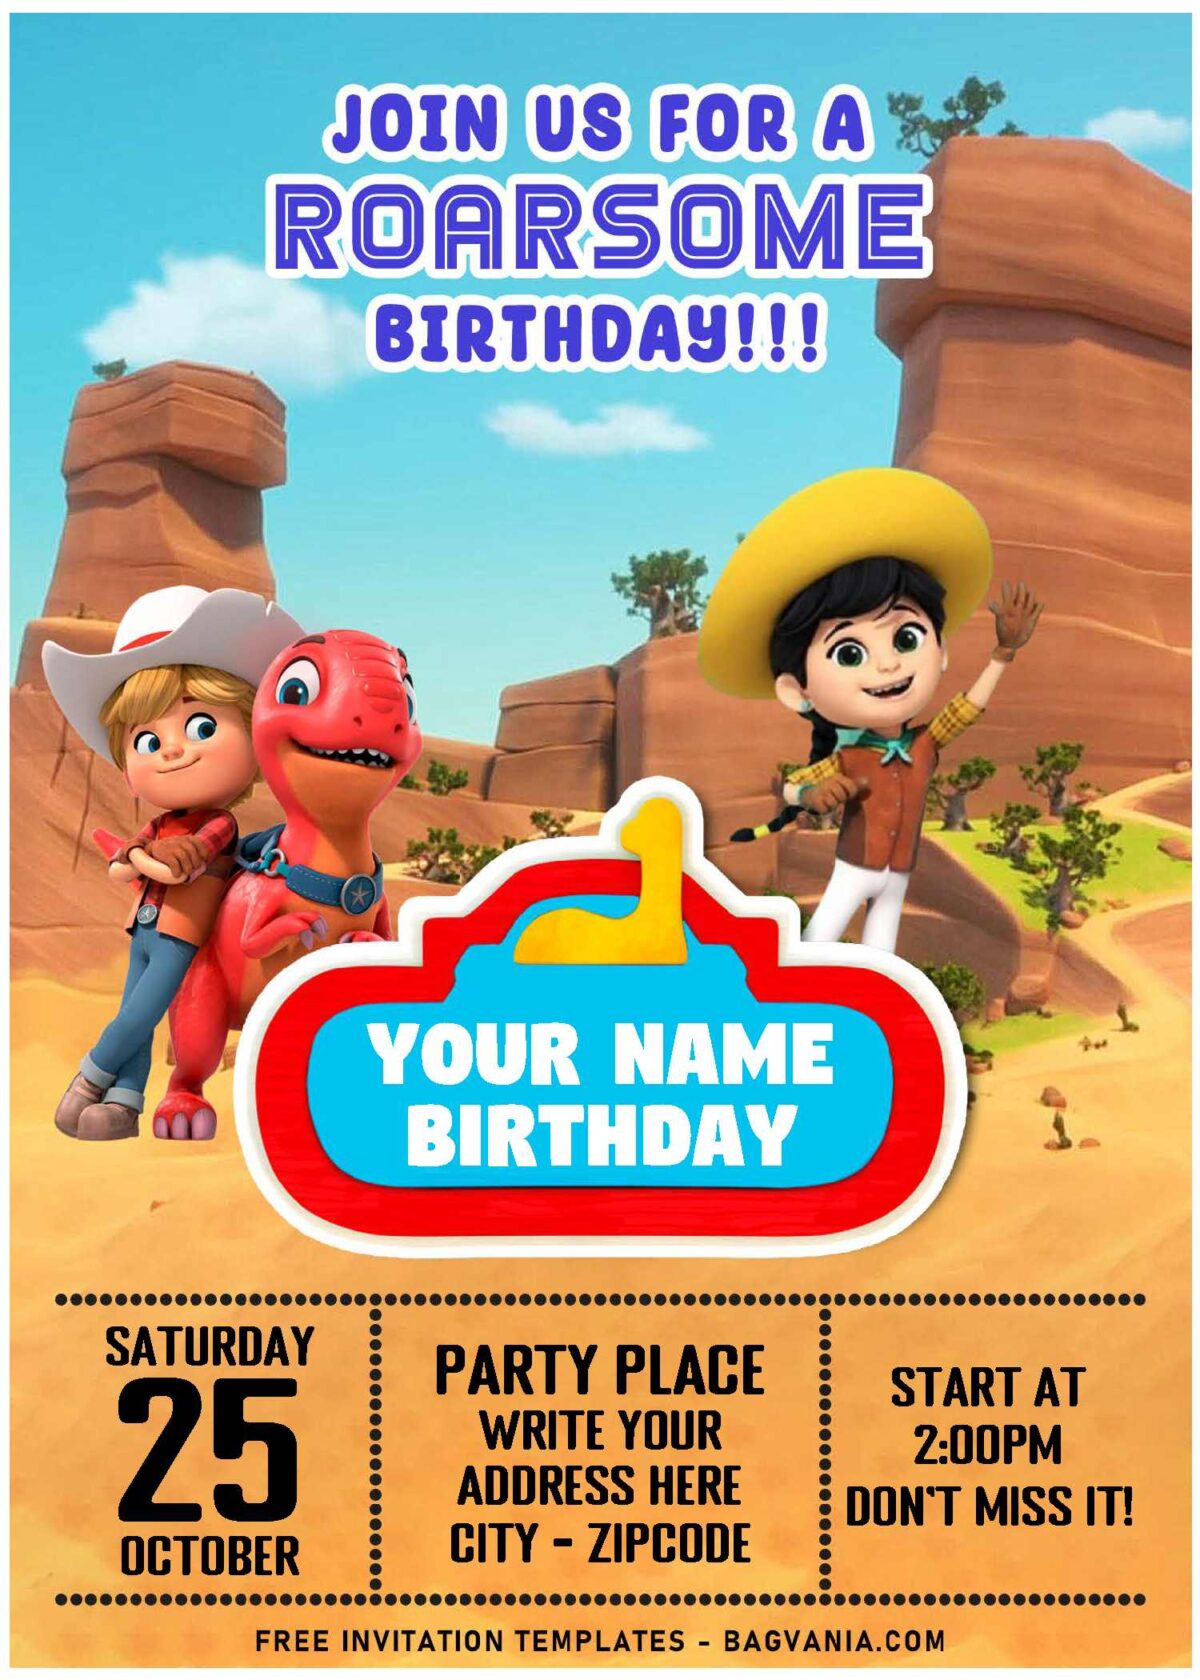 (Free Editable PDF) Meet The Rancher Dino Ranch Themed Birthday Invitation Templates with Desert Dino Ranch background